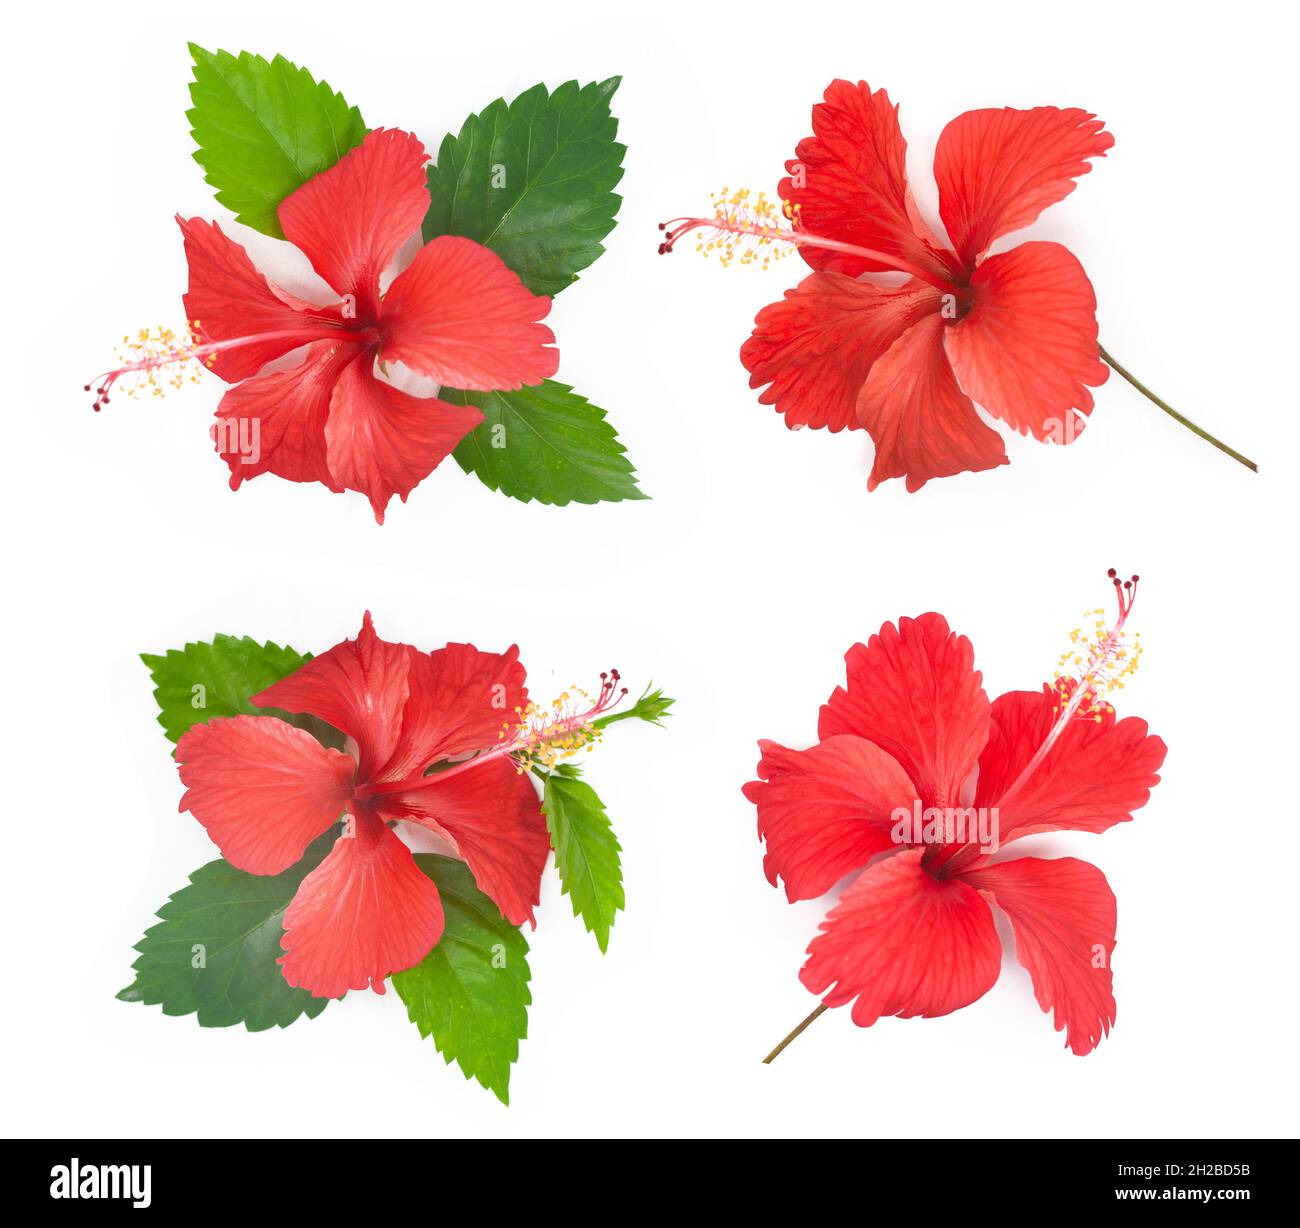 Hibiscus flower isolated on white background Stock Photo